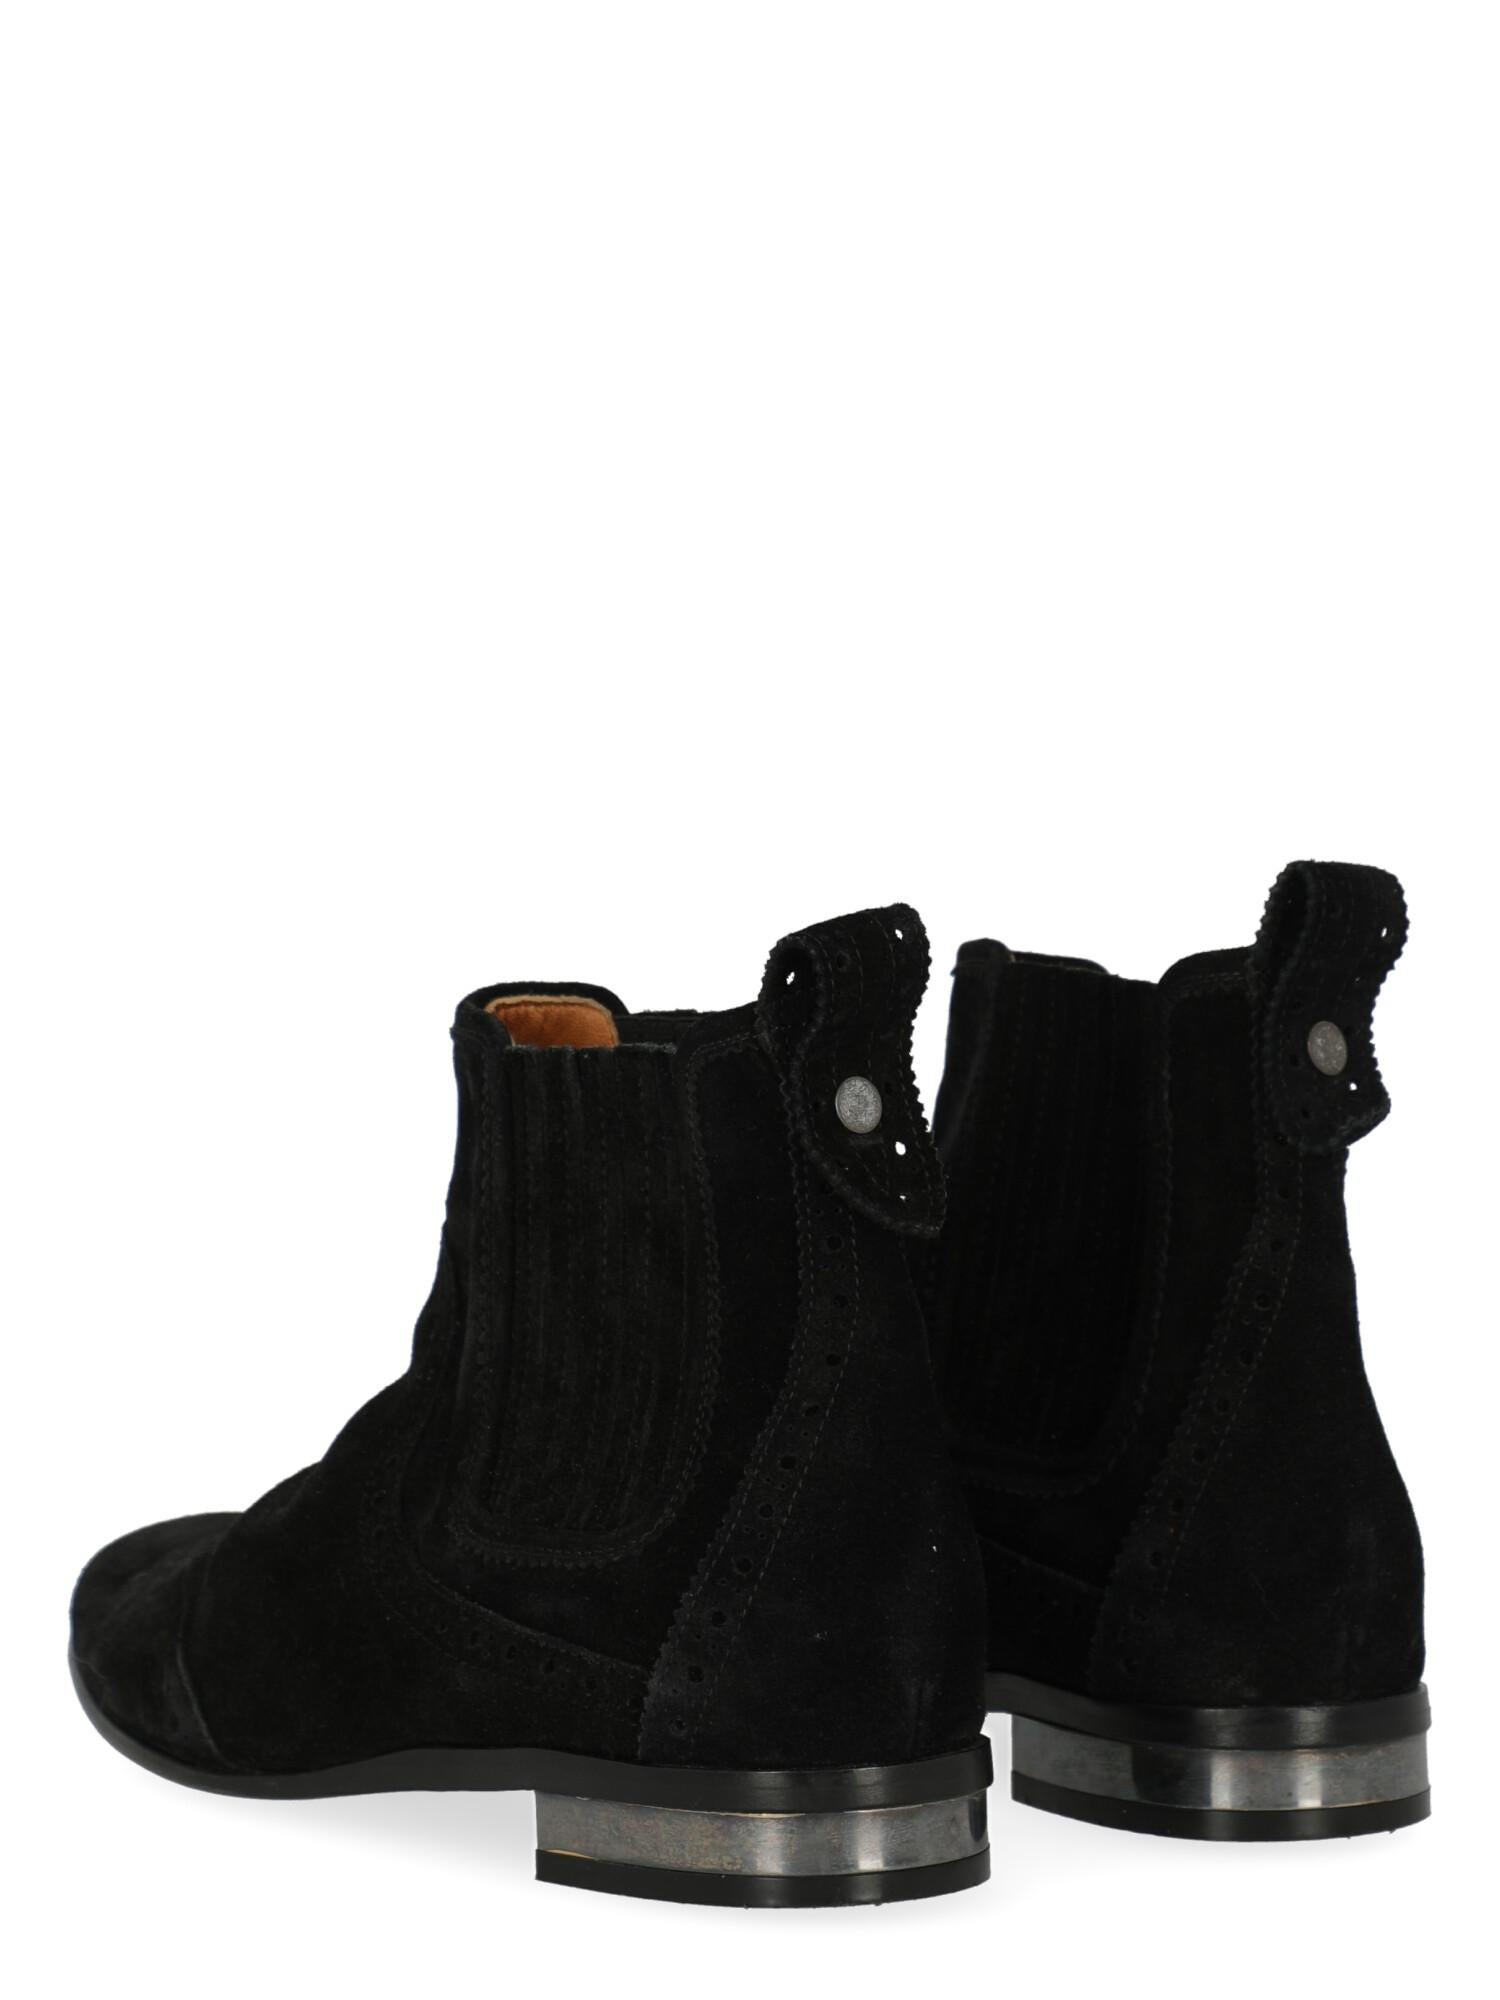 Golden Goose Deluxe Brand  Women   Ankle boots  Black Leather EU 37 In Good Condition For Sale In Milan, IT